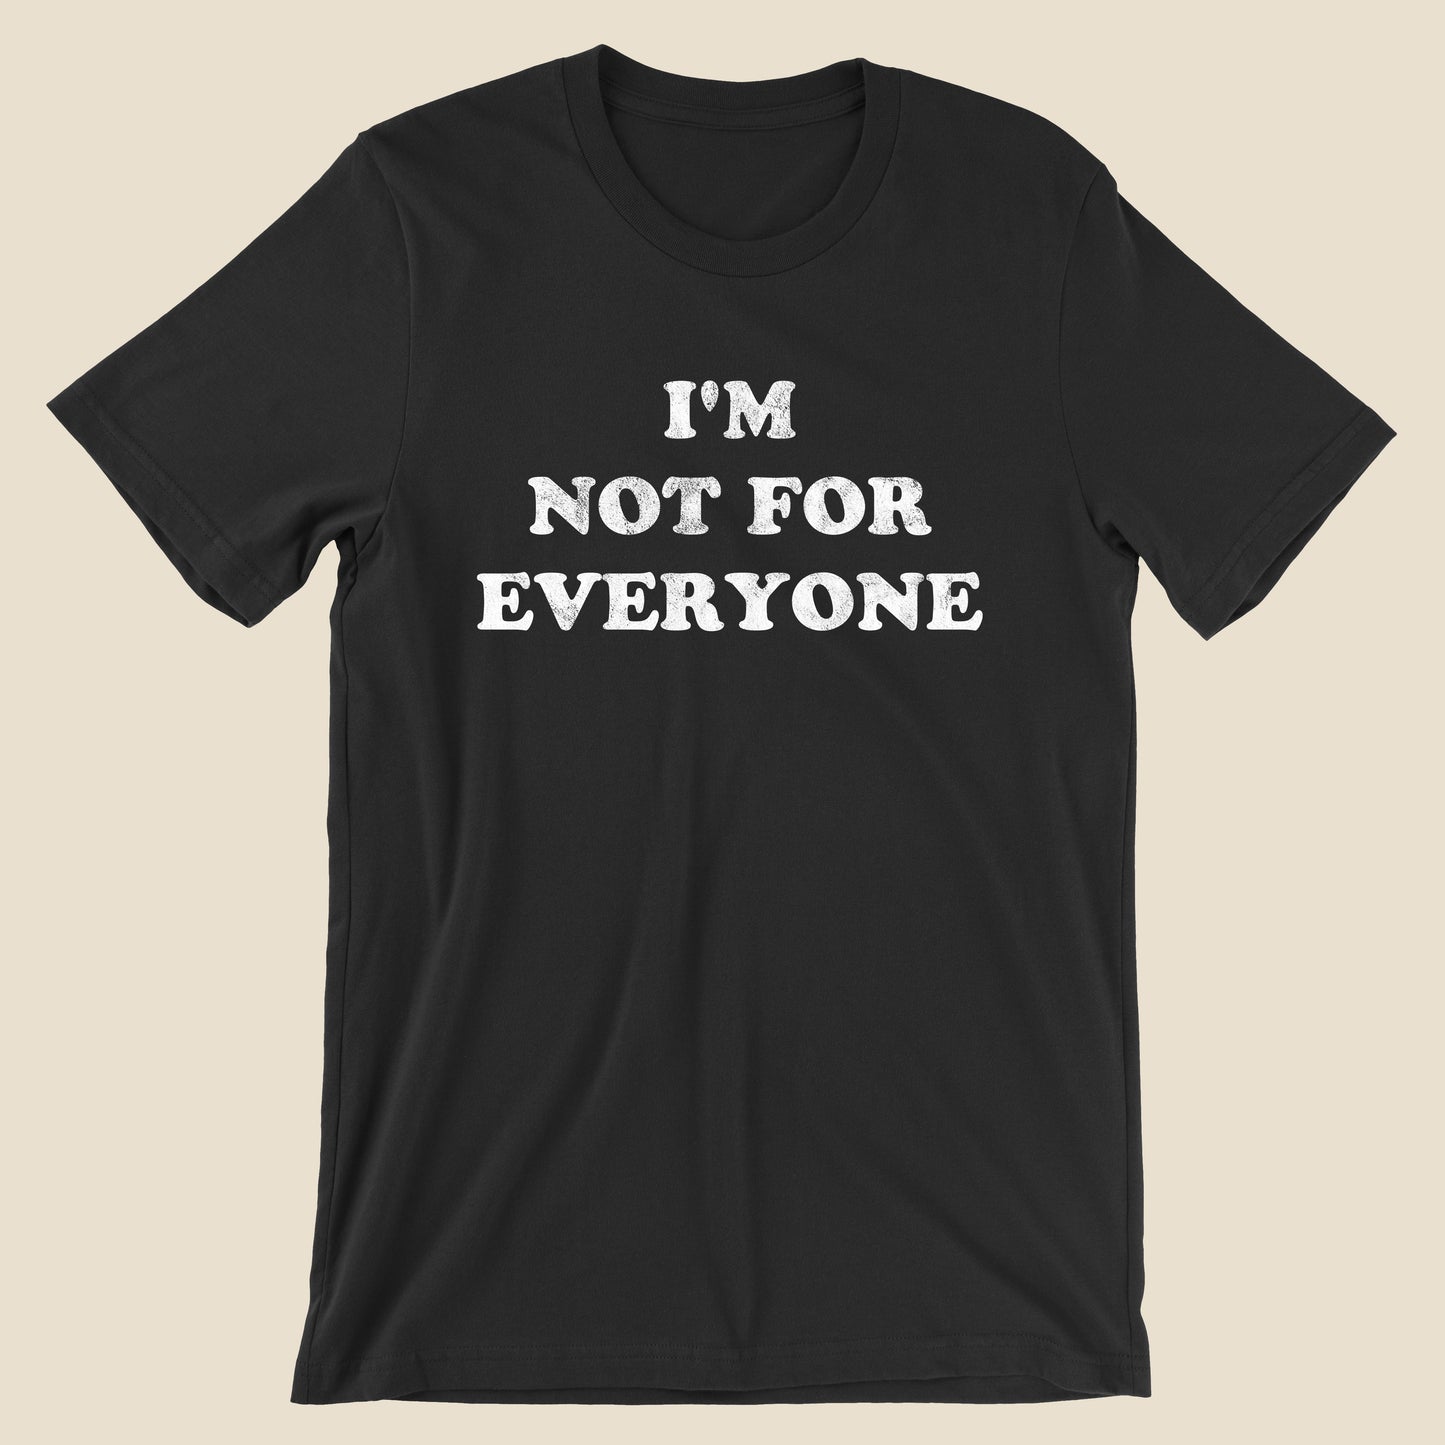 I'm Not For Everyone Black Tee